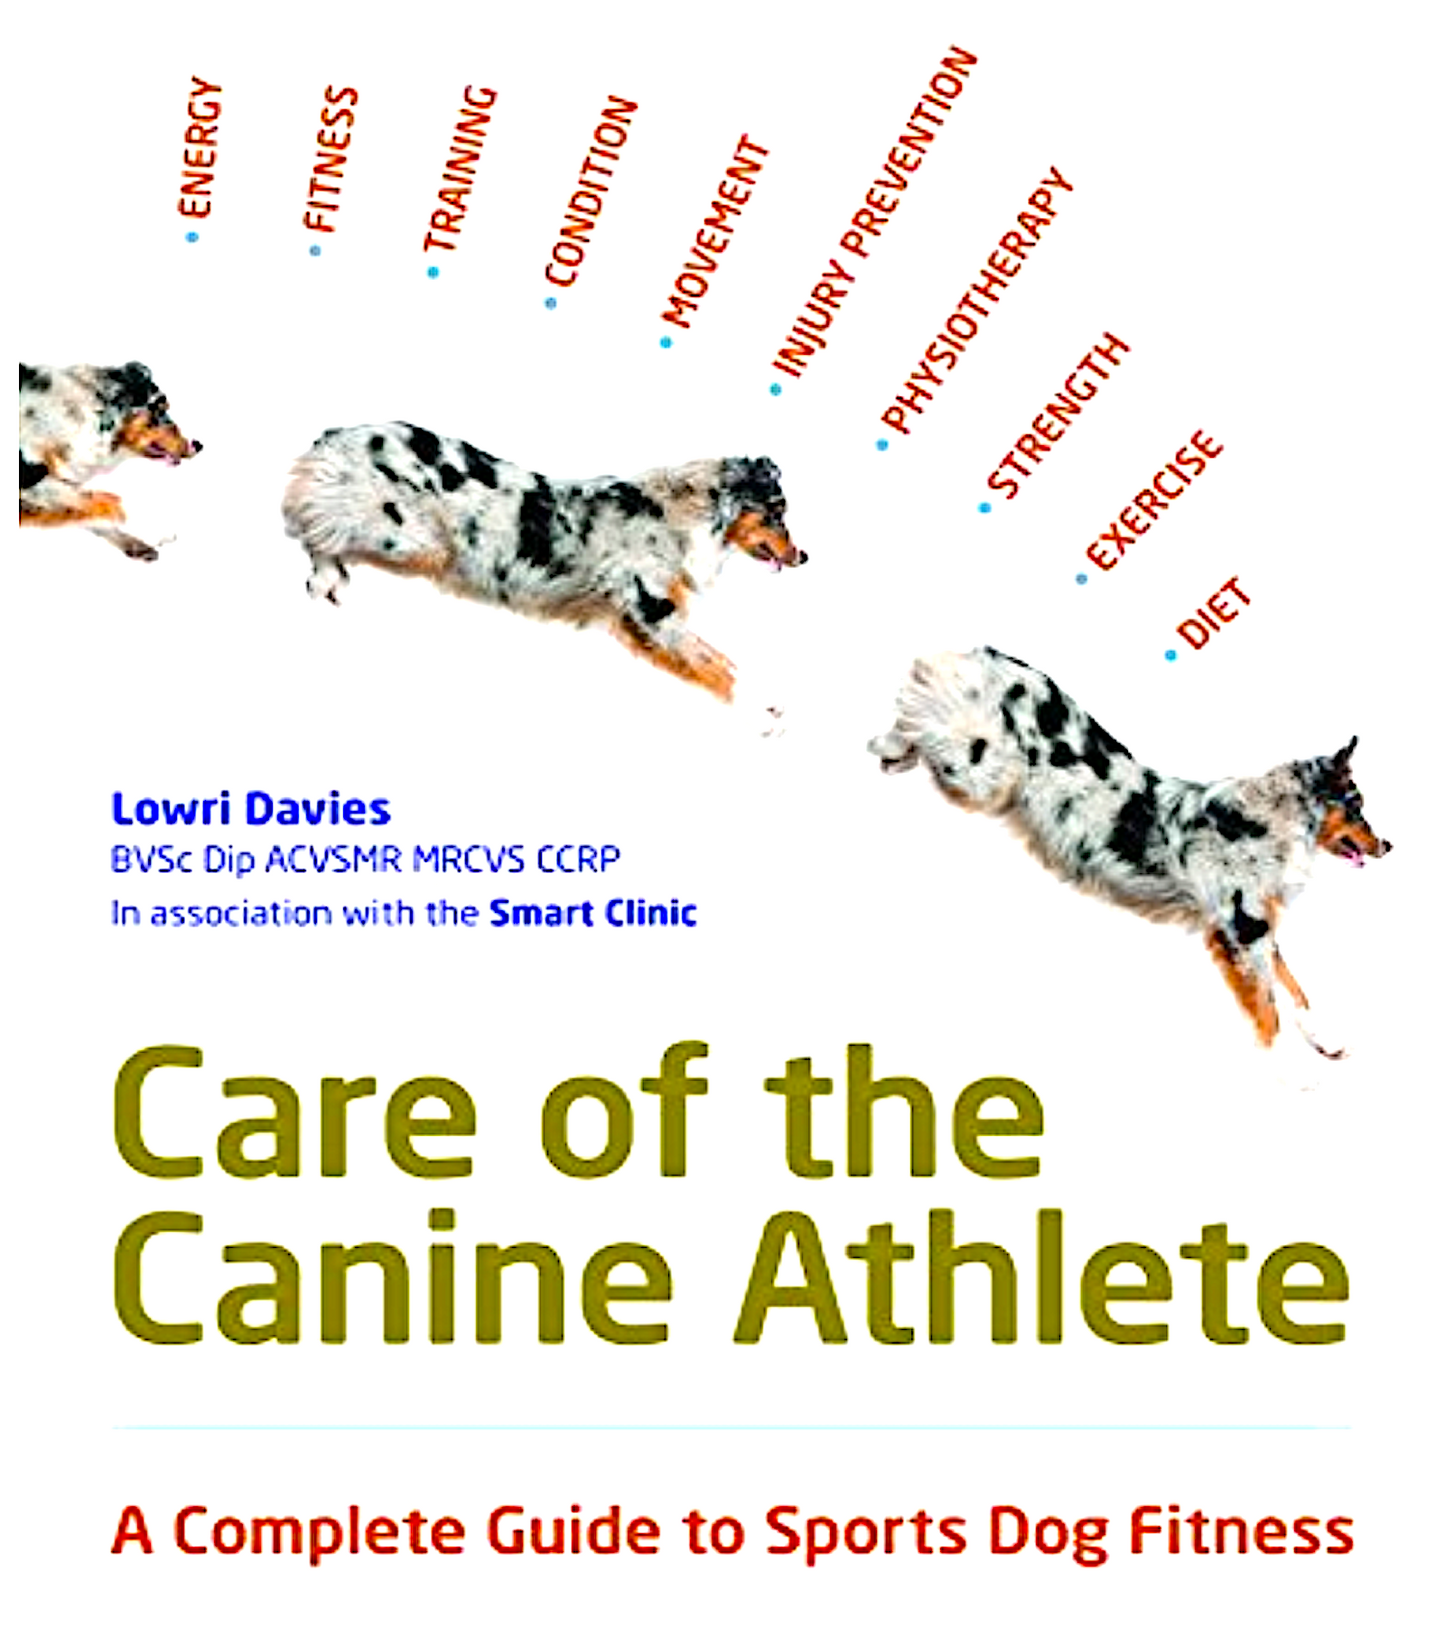 Care of the Canine Athlete: A Complete Guide to Sports Dog Fitness by Lowri Davies